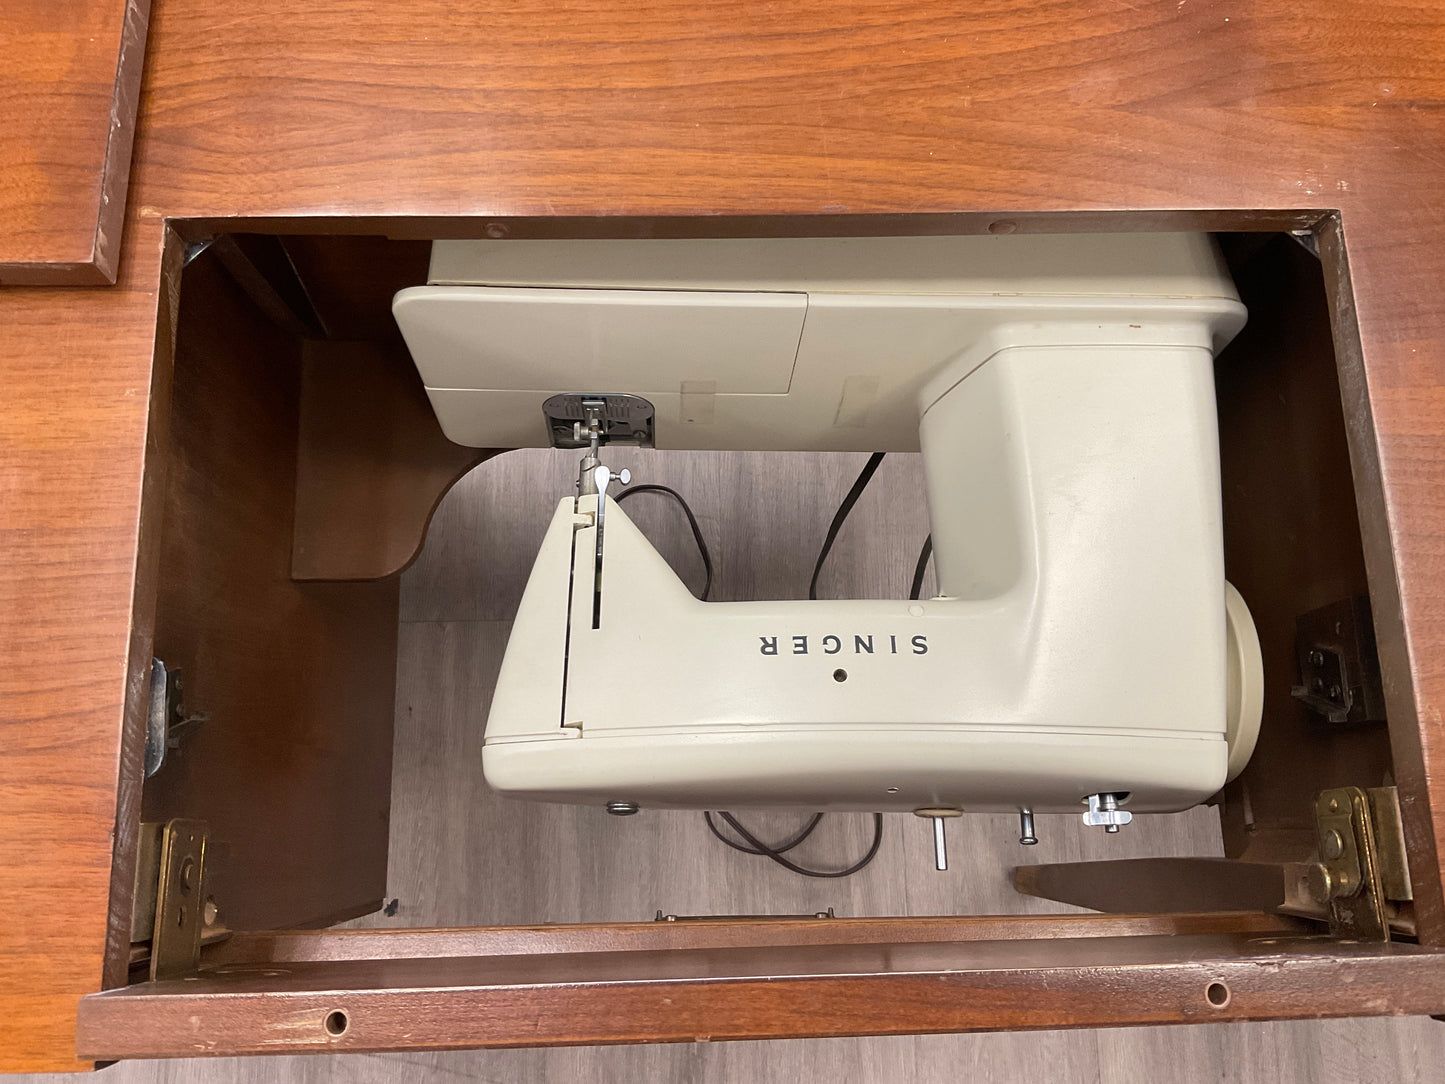 Singer Stylist 776 Sewing Machine and Desk